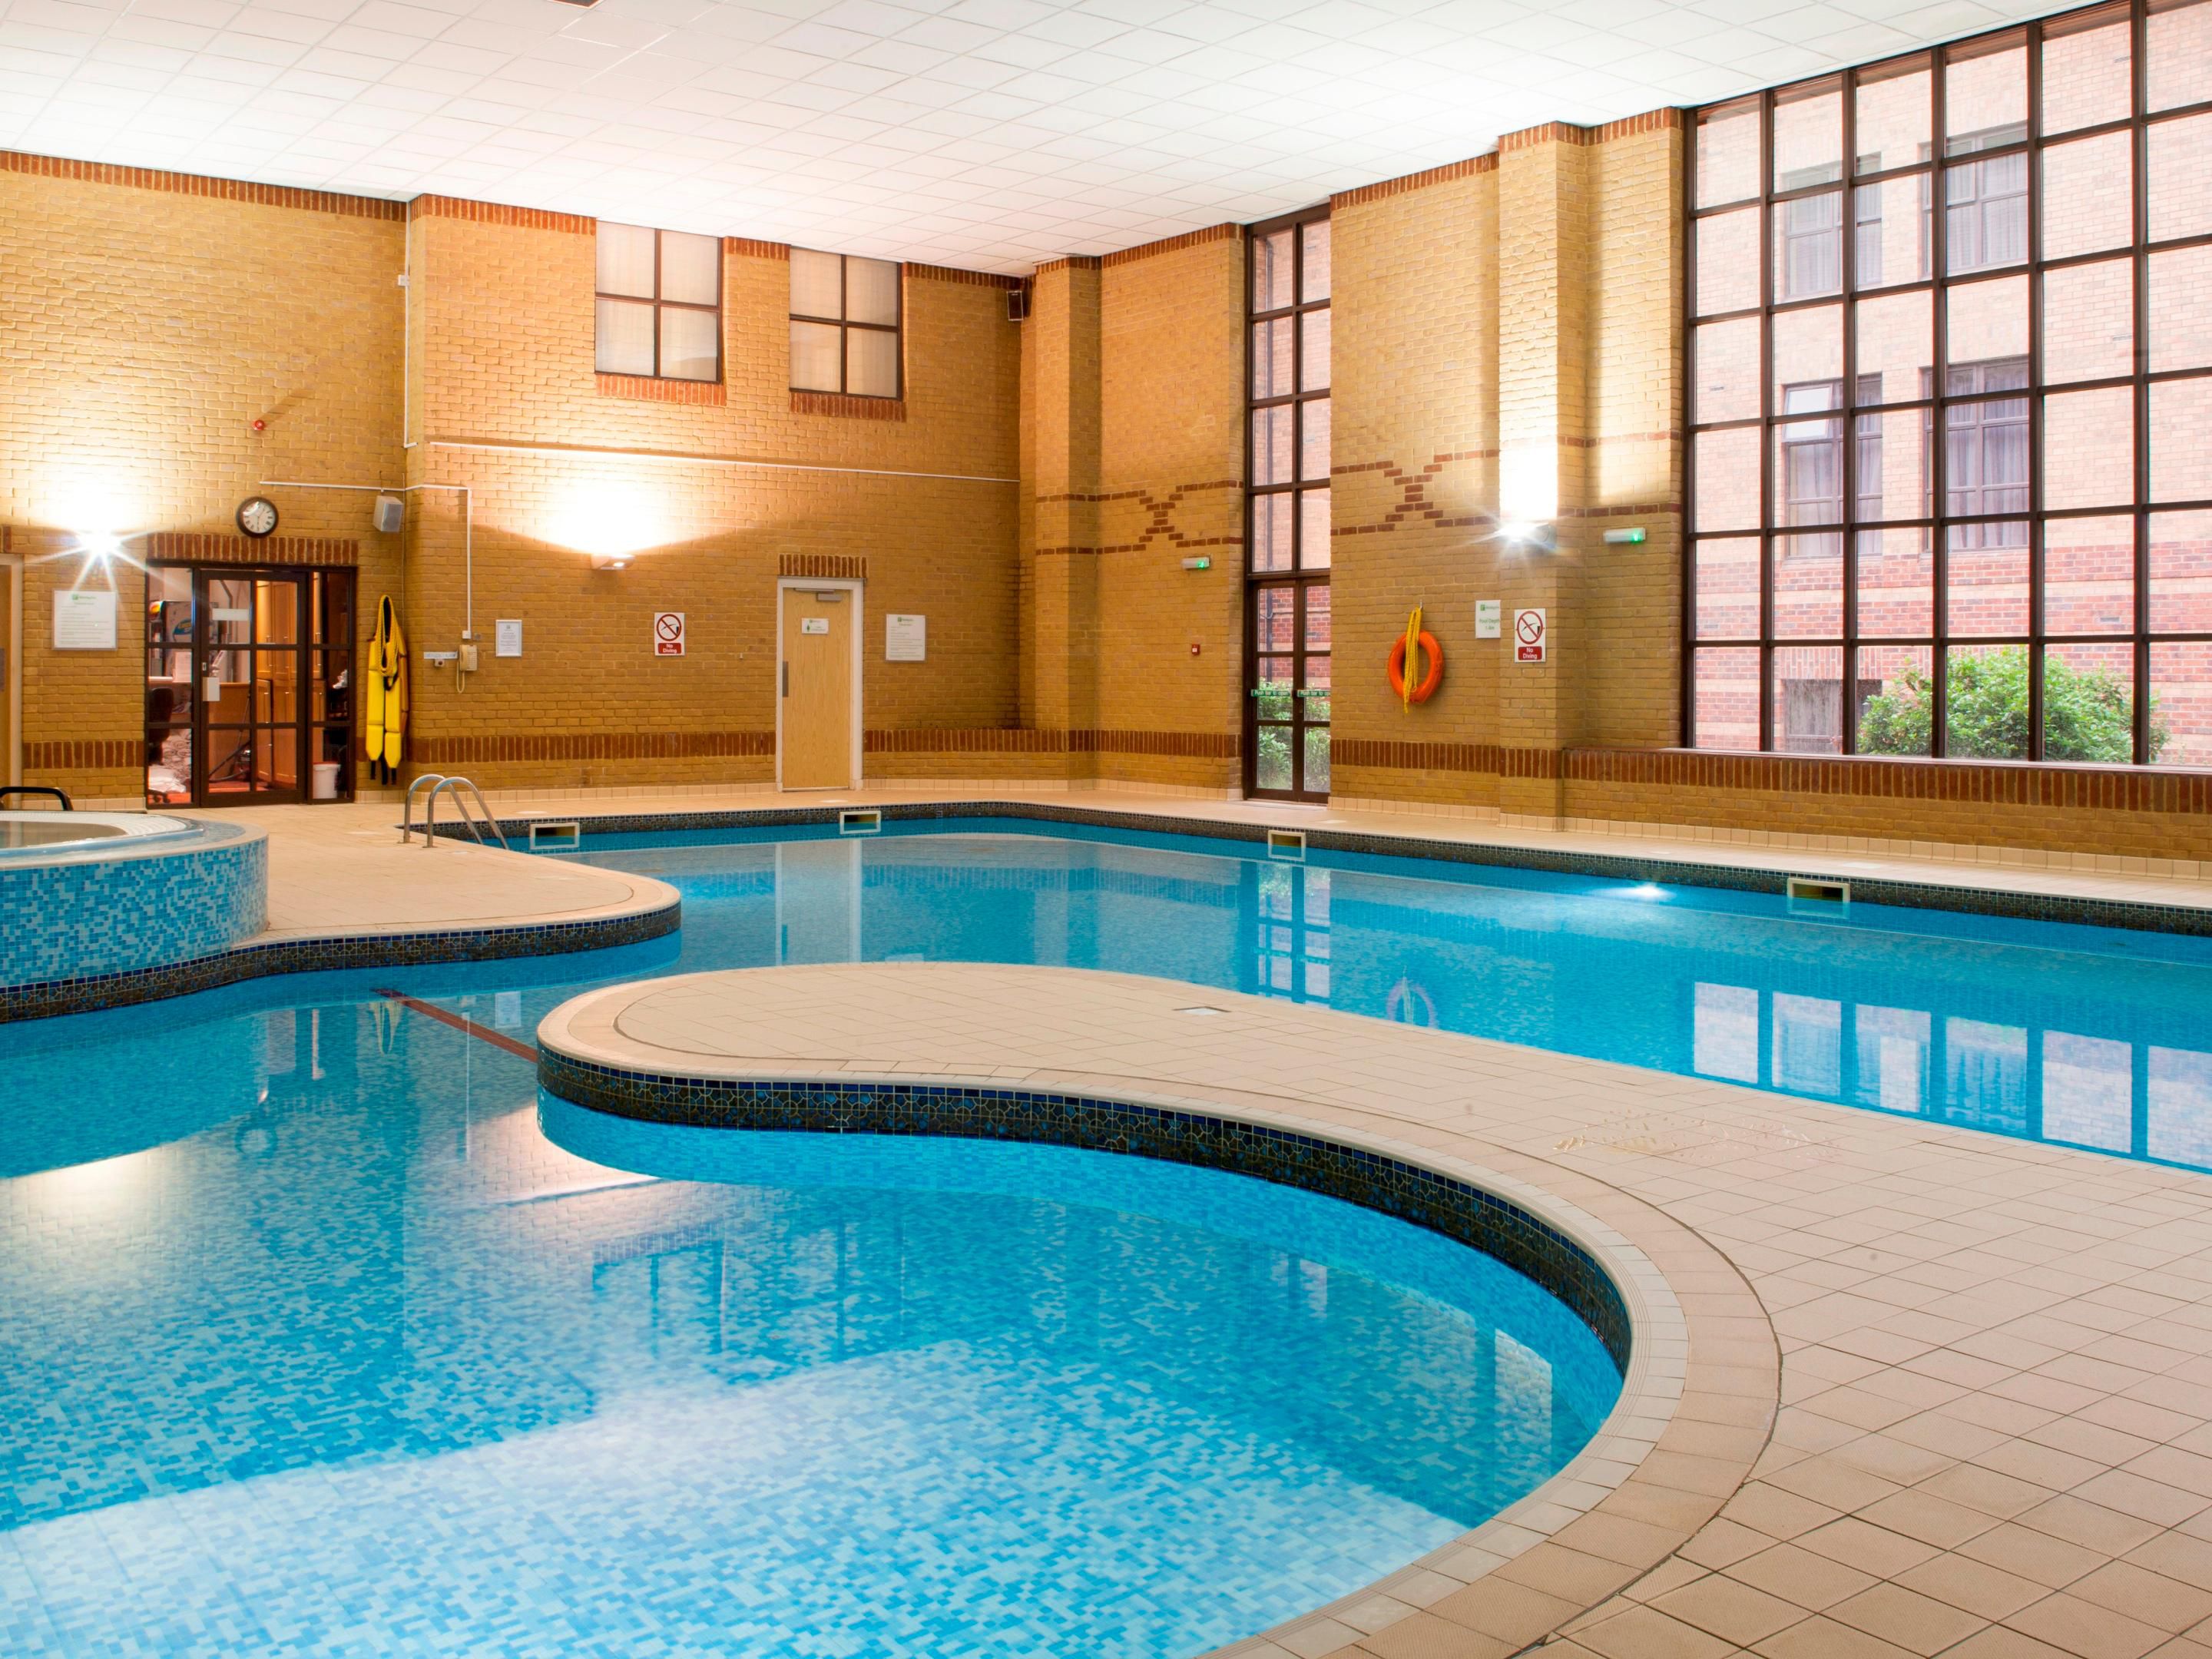 With plenty of facilities available for guests and visitors to our You Fit Health Club, including the following: 17.5 metre indoor pool, jaccuzi , steam room, sauna, gymnasium, cardiovascular equipment, free weights, power shower and lockers and beauty therapists.